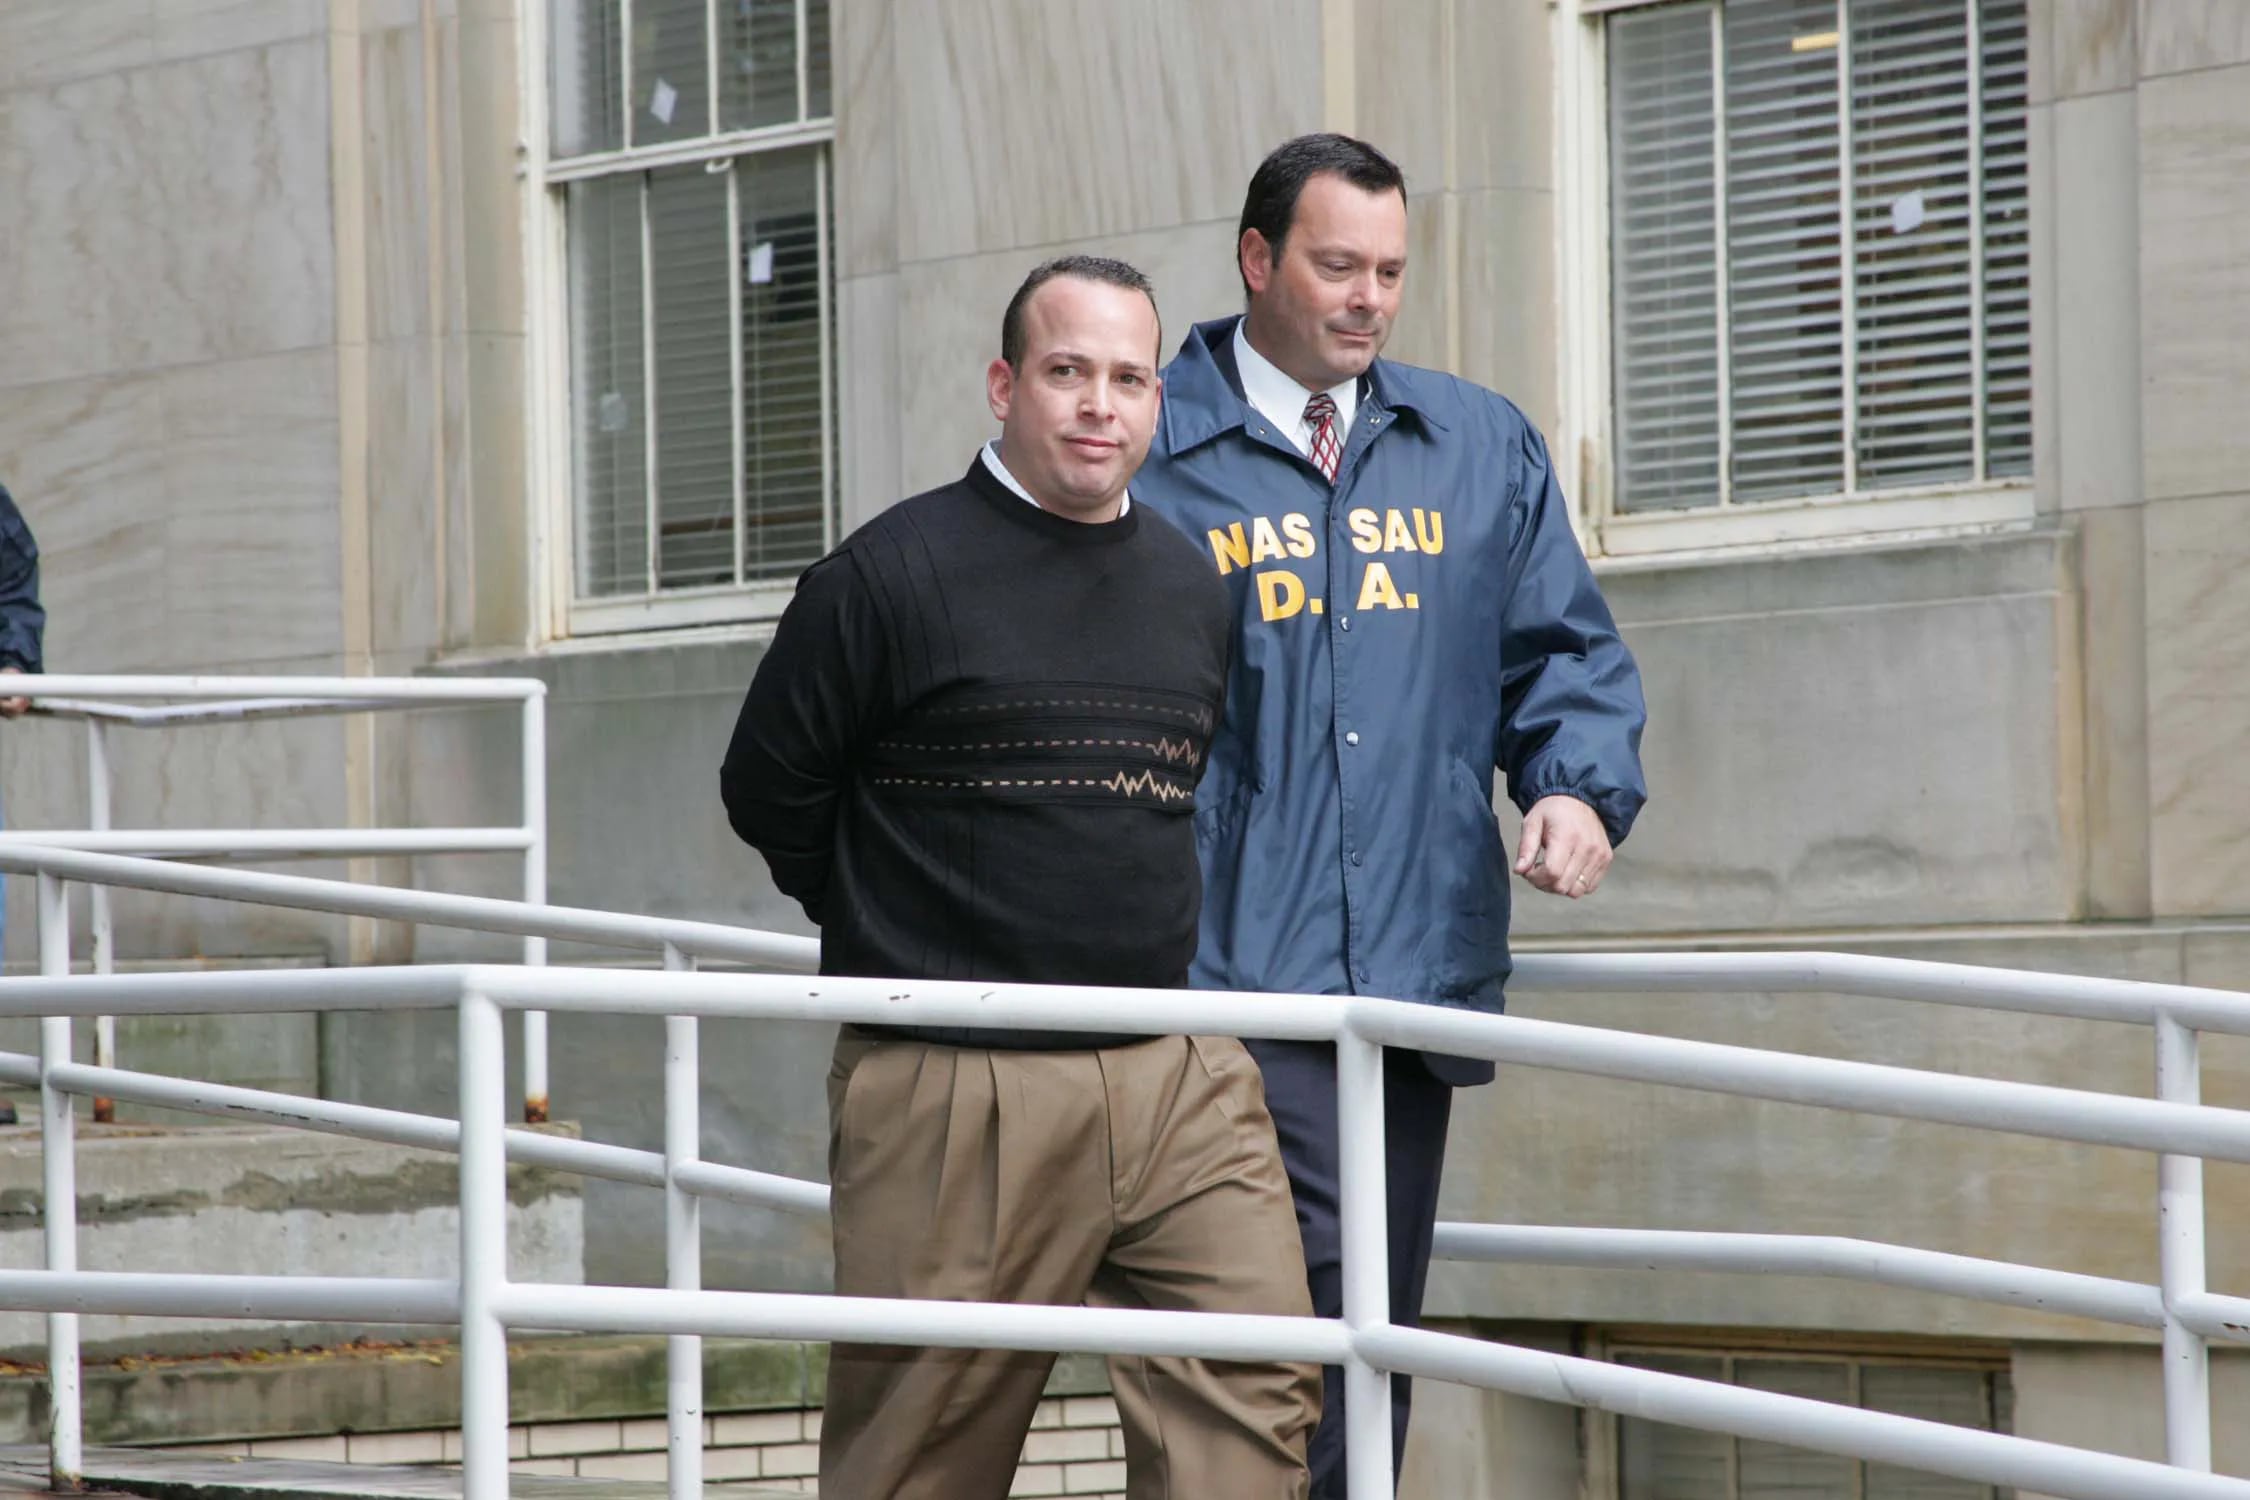 Joseph W. LaForte being escorted out of police headquarters in Mineola, N.Y., after his arrest in a Ponzi scheme case in October 2005. 